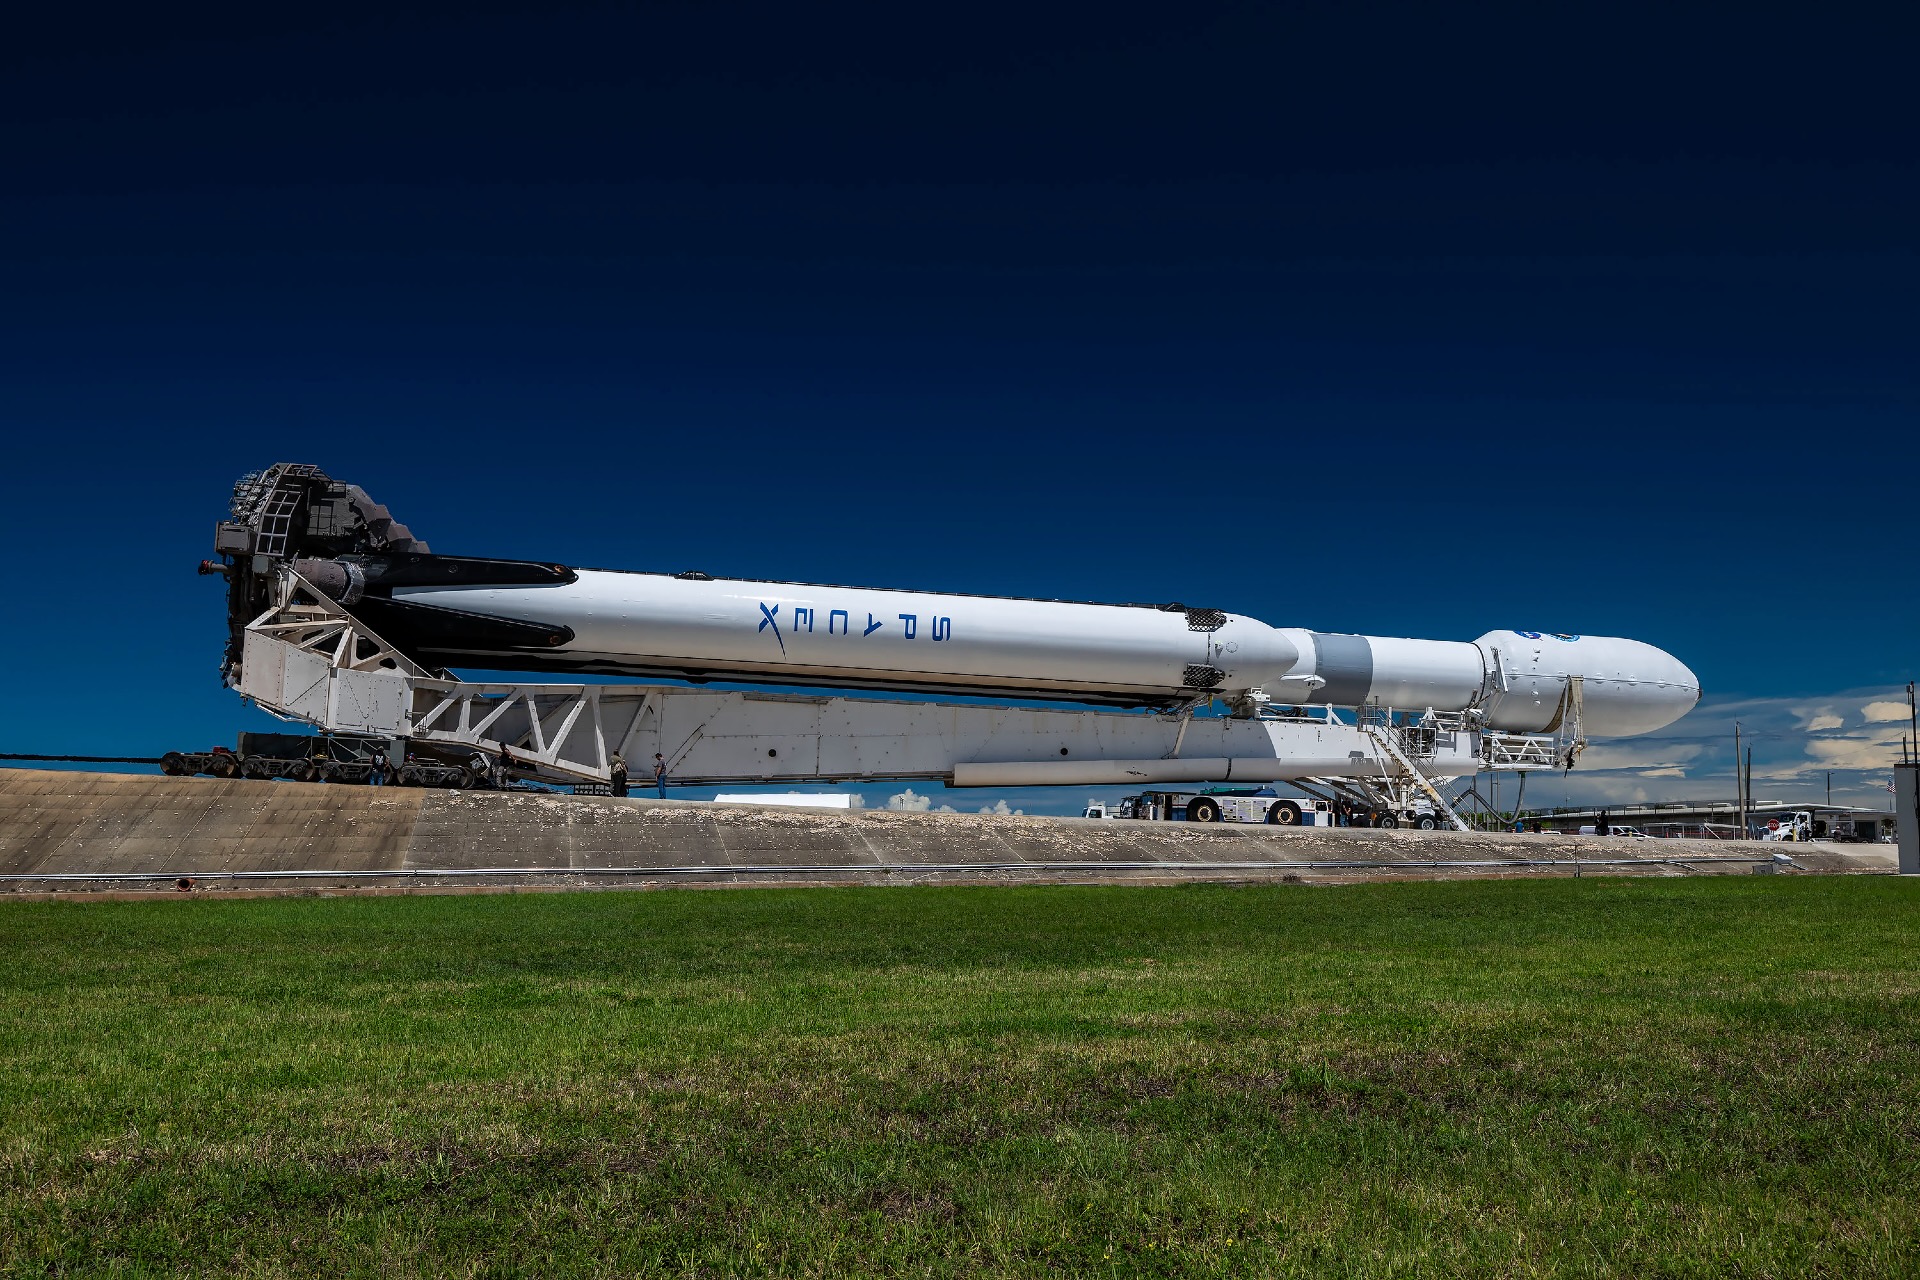 a large white rocket is transported horizontally toward its launch pad, with a blue sky in the background